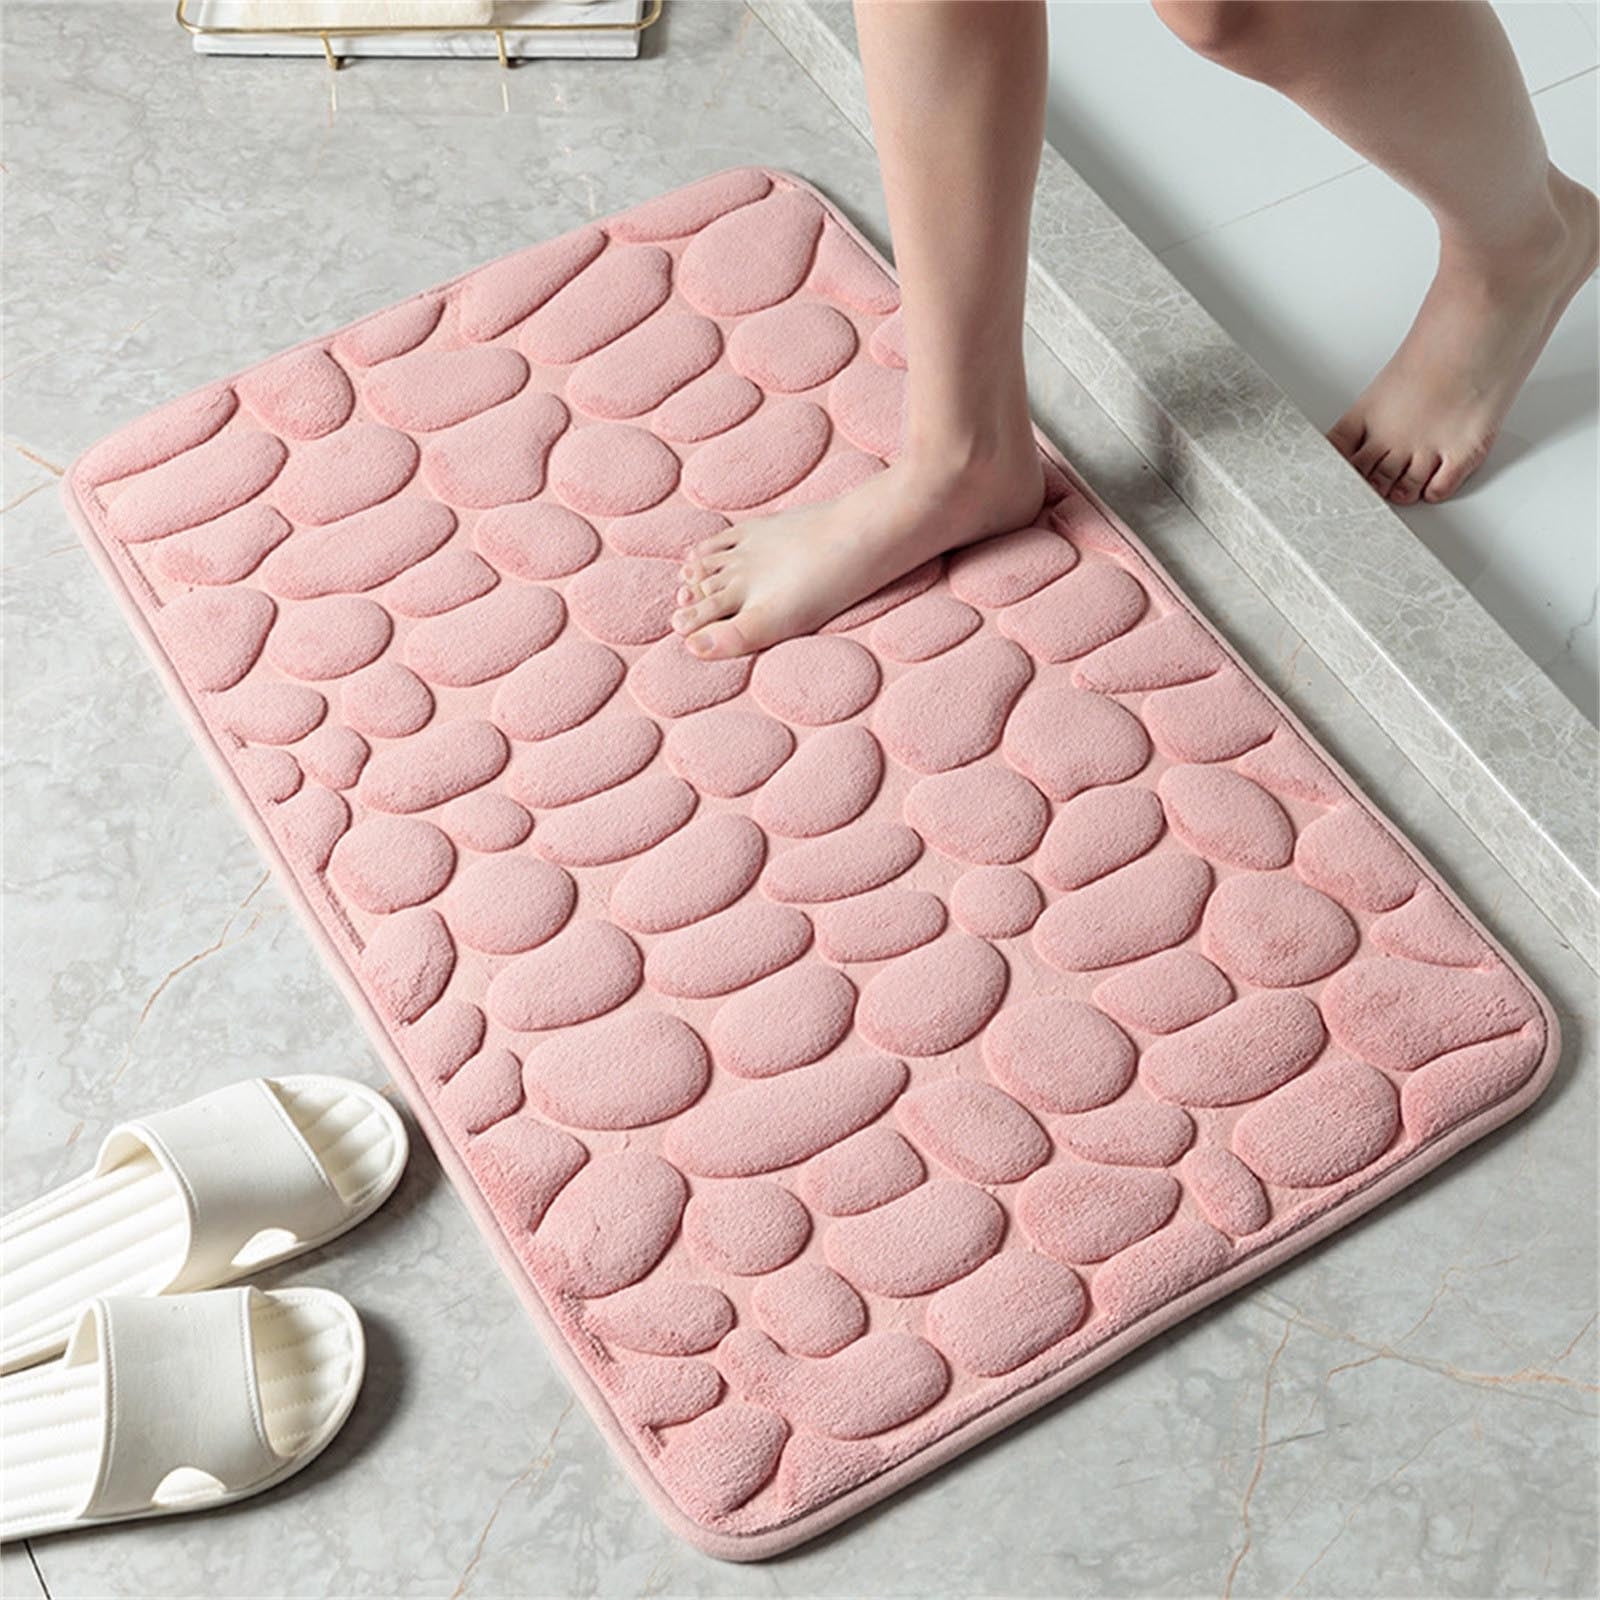 SDJMa Stone Bath Mat by Muddy Mat, Quick Dry Diatomaceous Shower Mat for  Sink, Bath Tub, Kitchen Counter, and Bathroom Floor, Super Absorbent, Fast